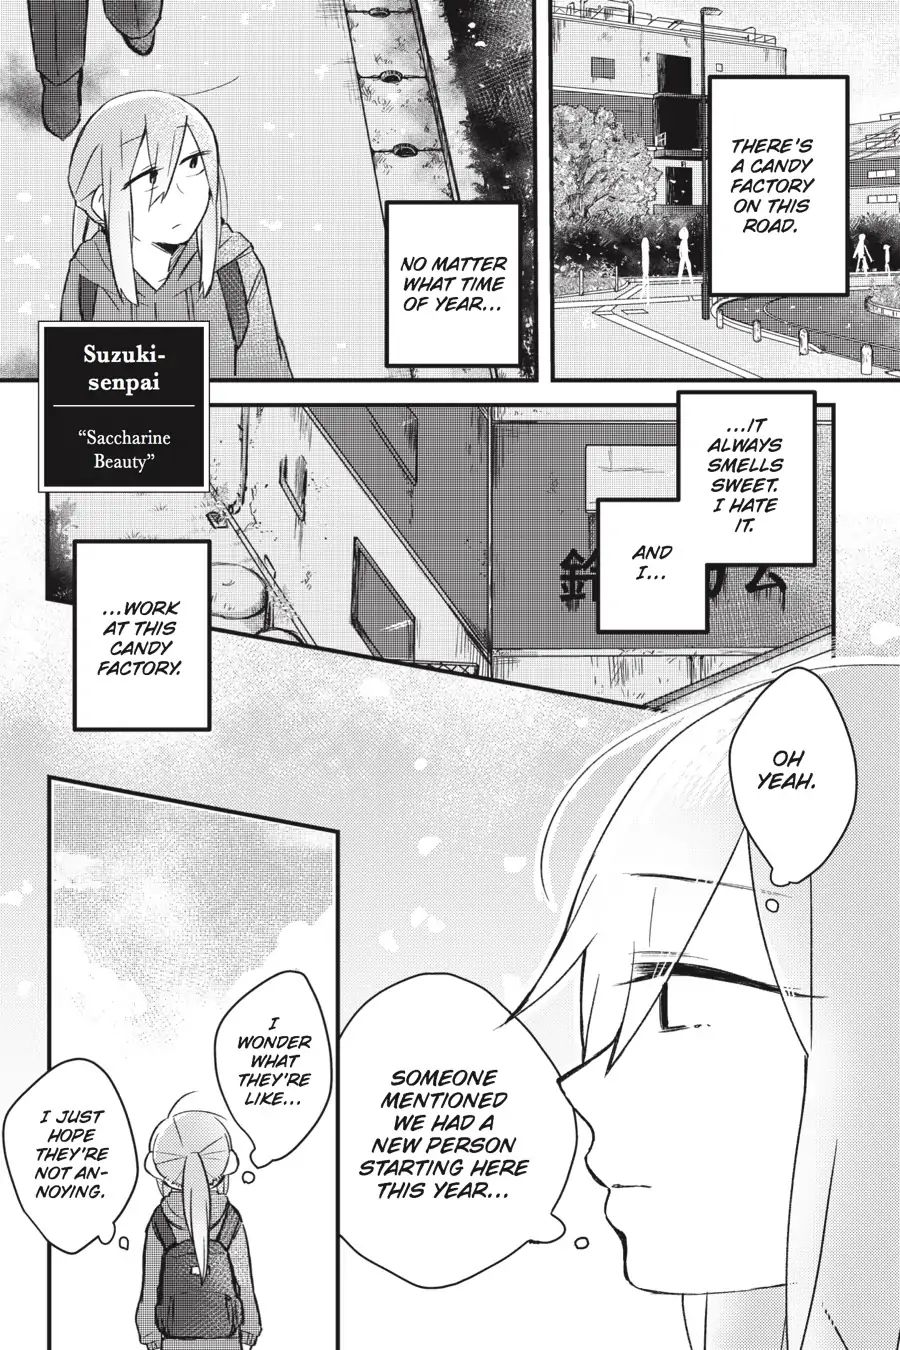 Every Time We Meet Eye To Eye, I Fall In Love With Her Vol.1 Chapter: Suzuki-Senpai - Saccharine Beauty - Picture 1